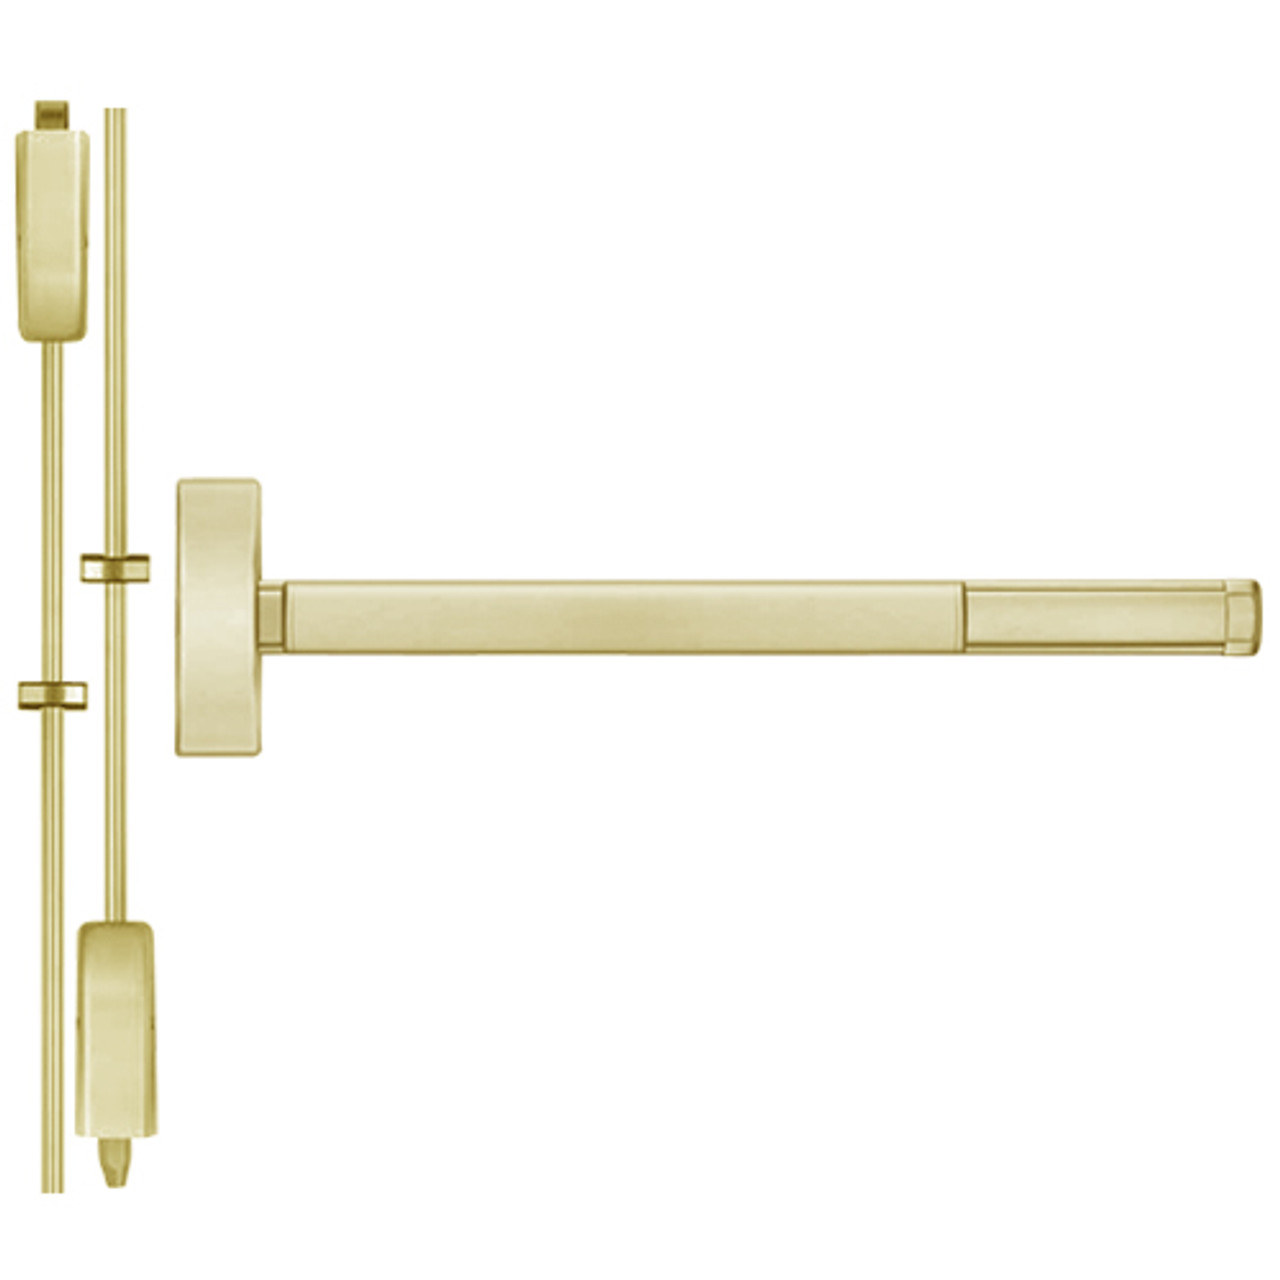 TS2215-606-36 PHI 2200 Series Non Fire Rated Apex Surface Vertical Rod Device with Touchbar Monitoring Switch Prepped for Thumb Piece Always Active in Satin Brass Finish